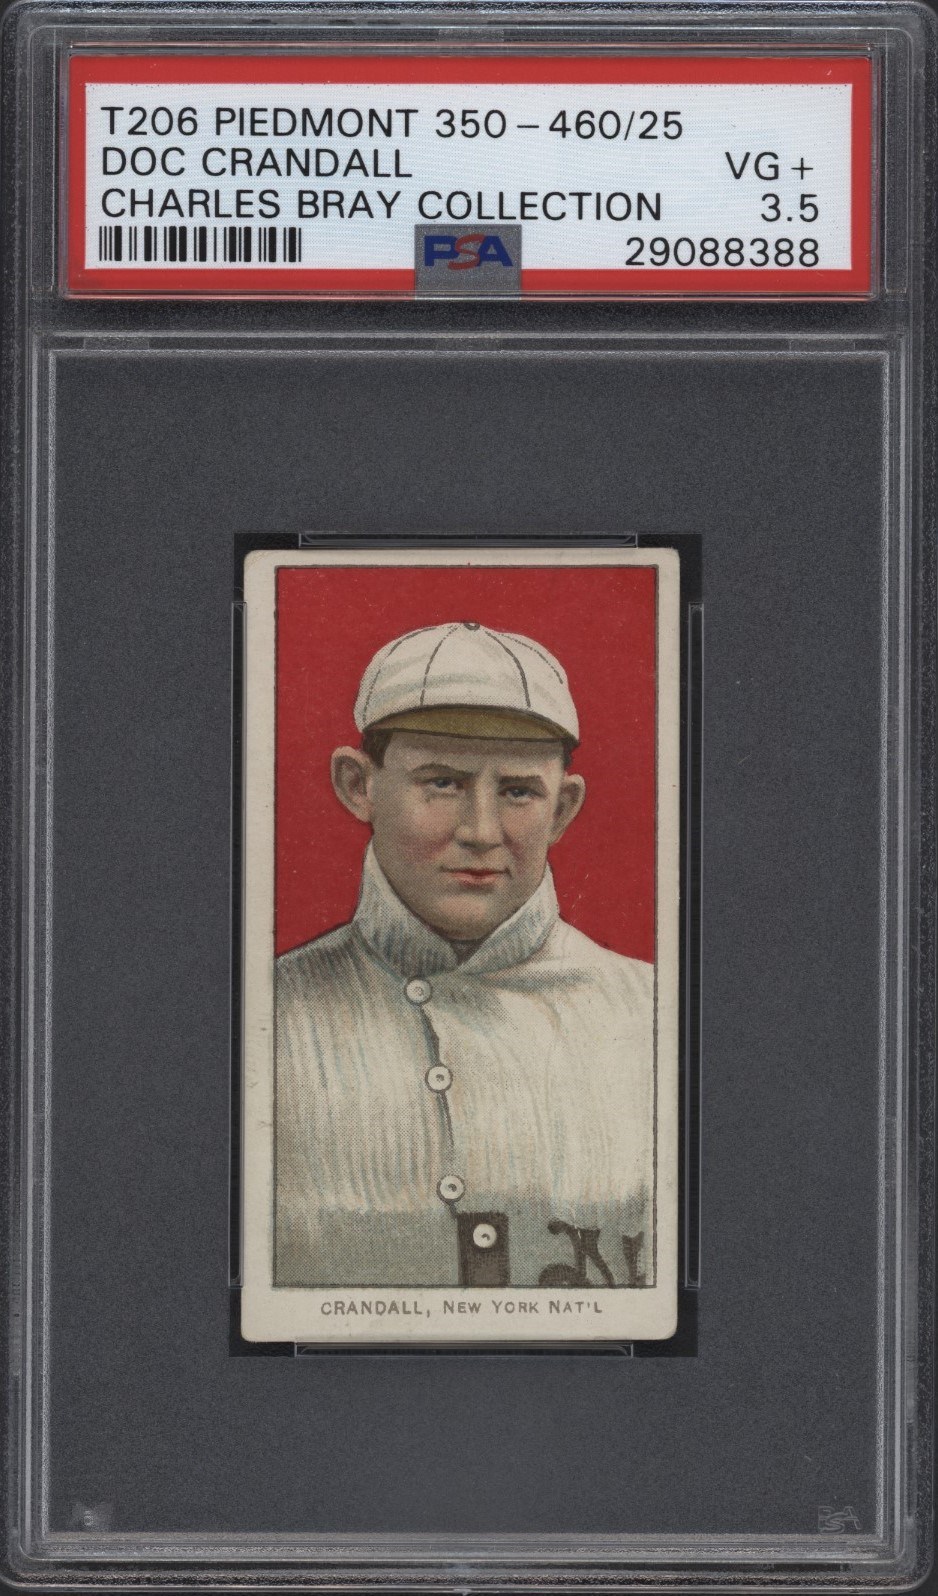 T206 Piedmont 350-460/25 Doc Crandall PSA 3.5 From the Charles Bray Collection